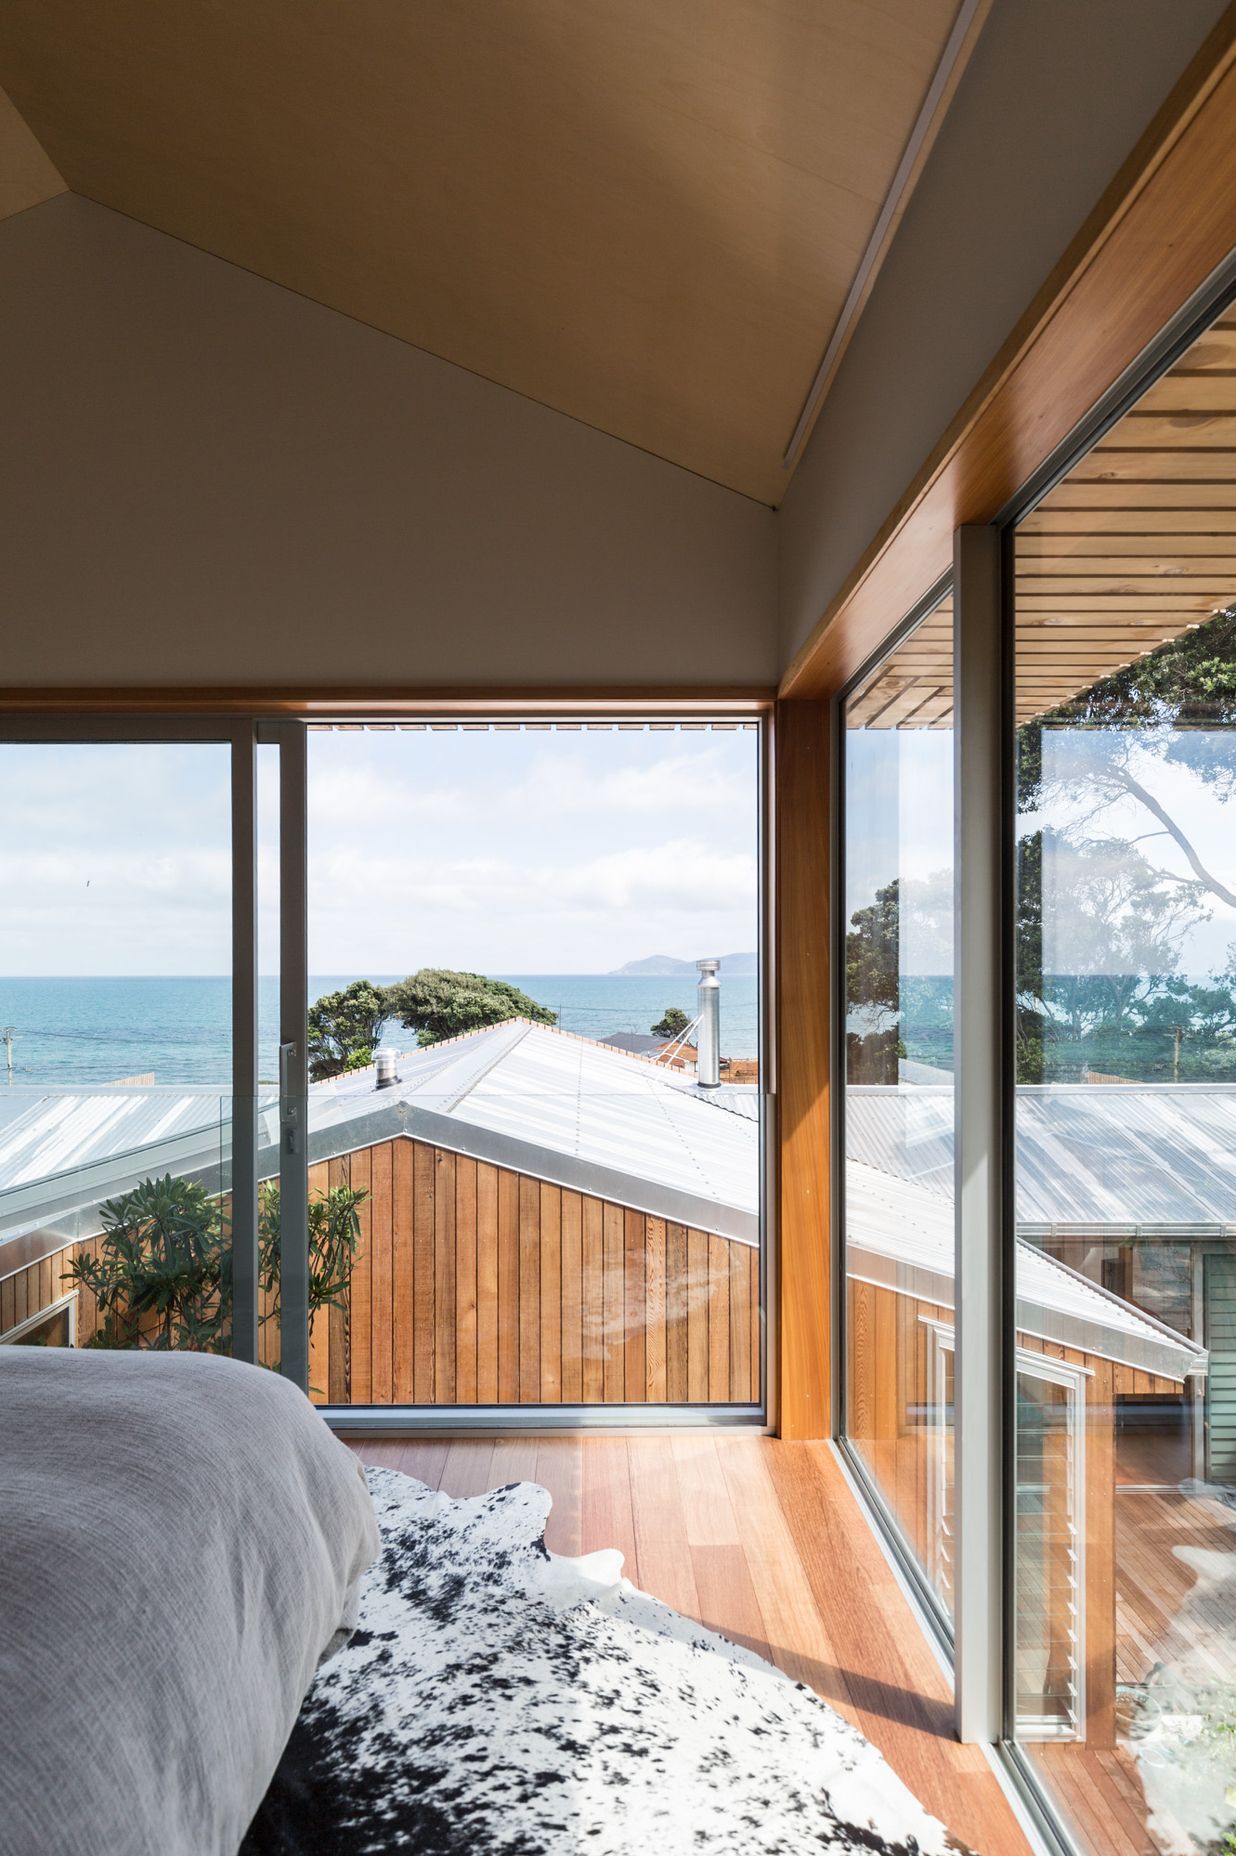 The new master bedroom has enviable views out over the coast and towards Kapiti Island.